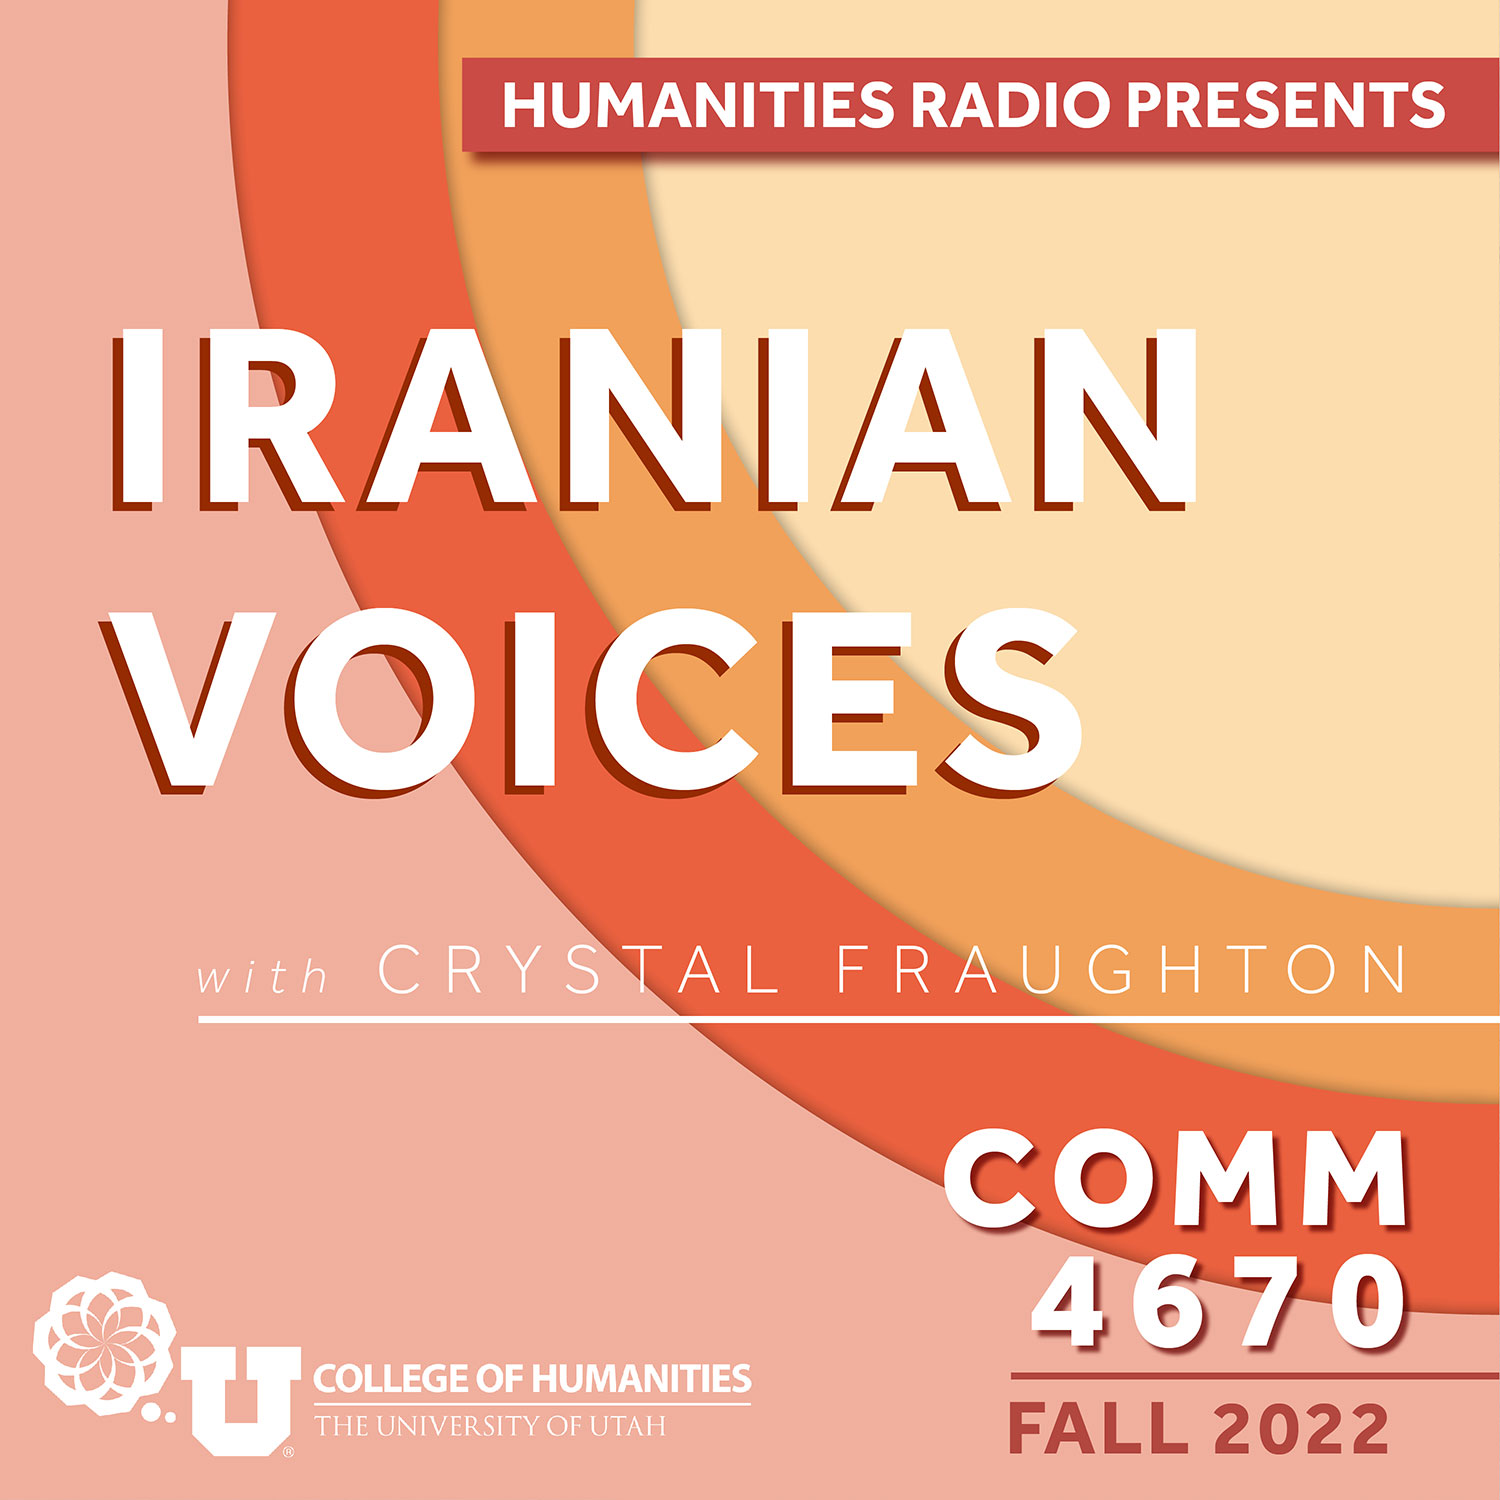 Iranian Voices with Crystal Fraughton